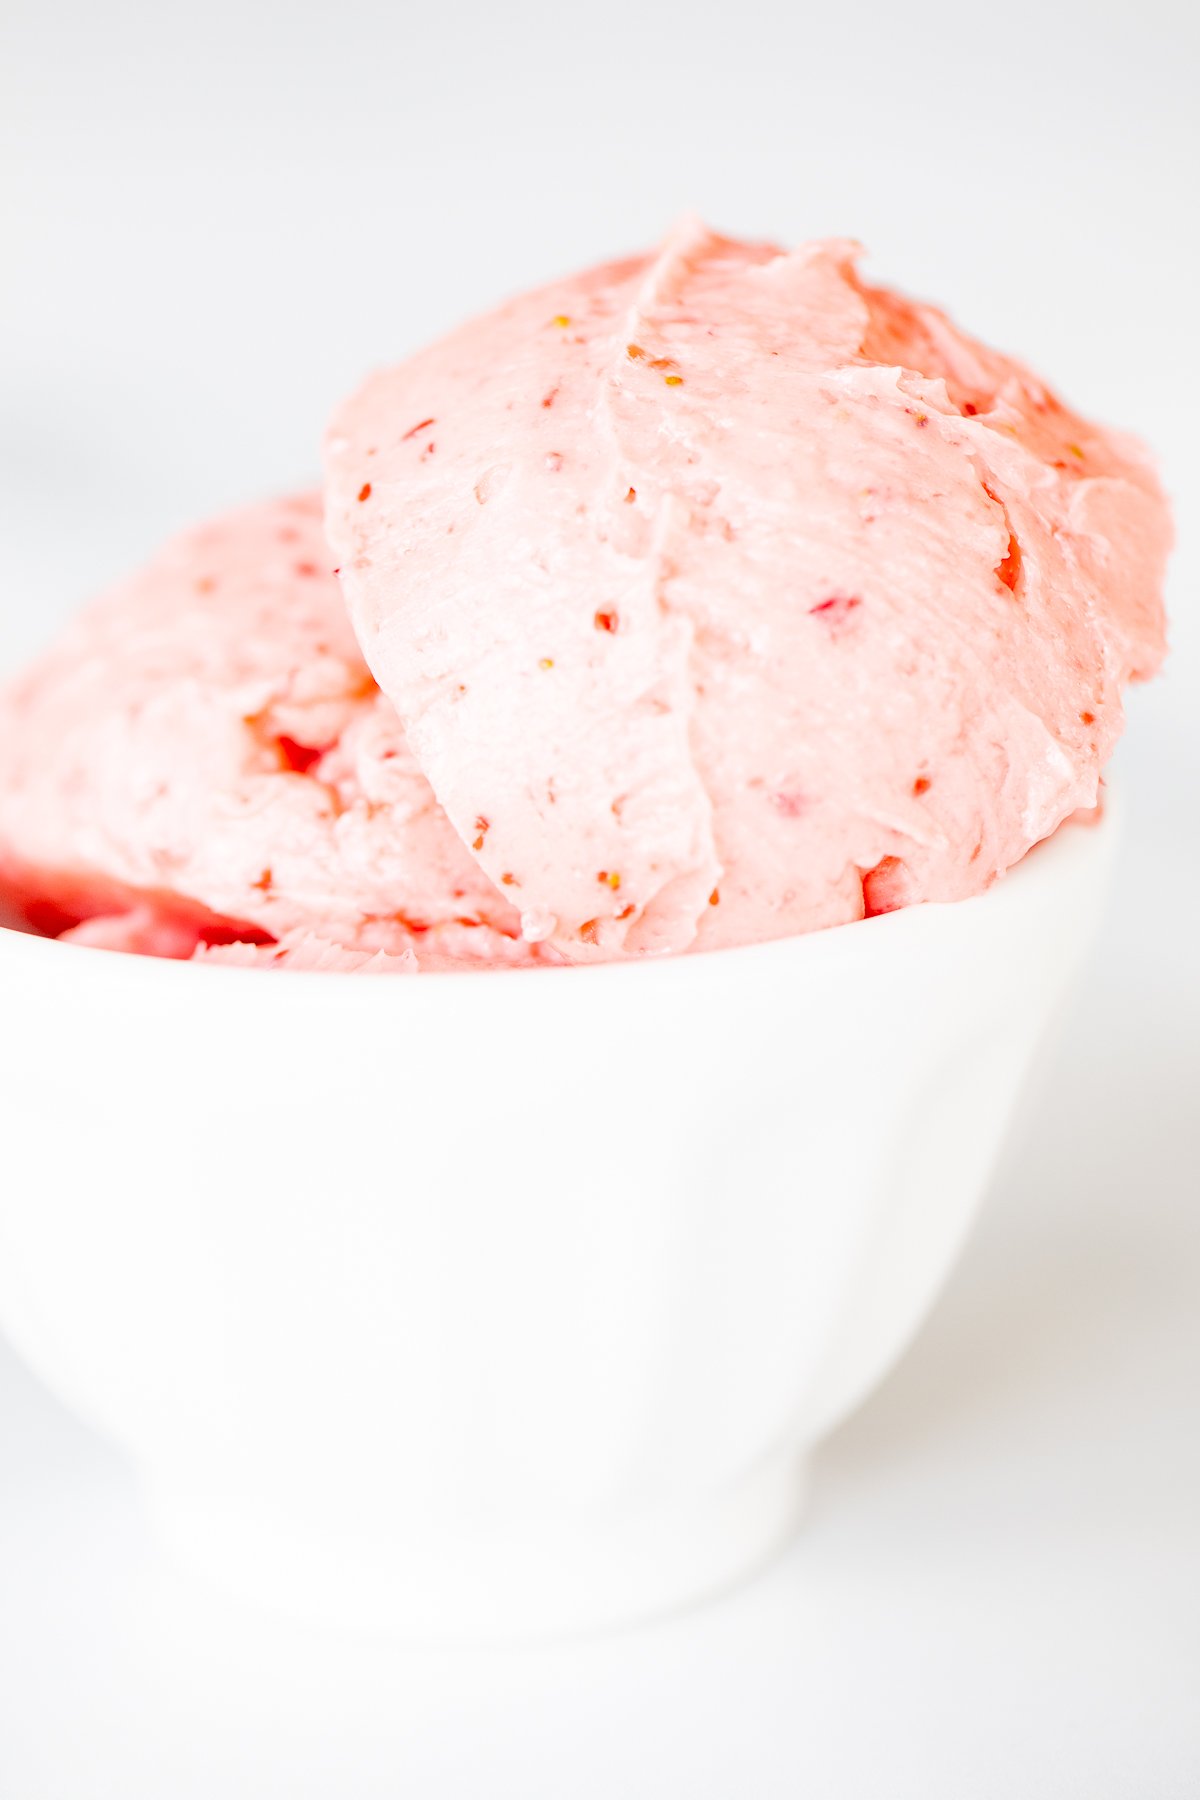 A small white bowl full of pink toned strawberry butter, on a marble surface.